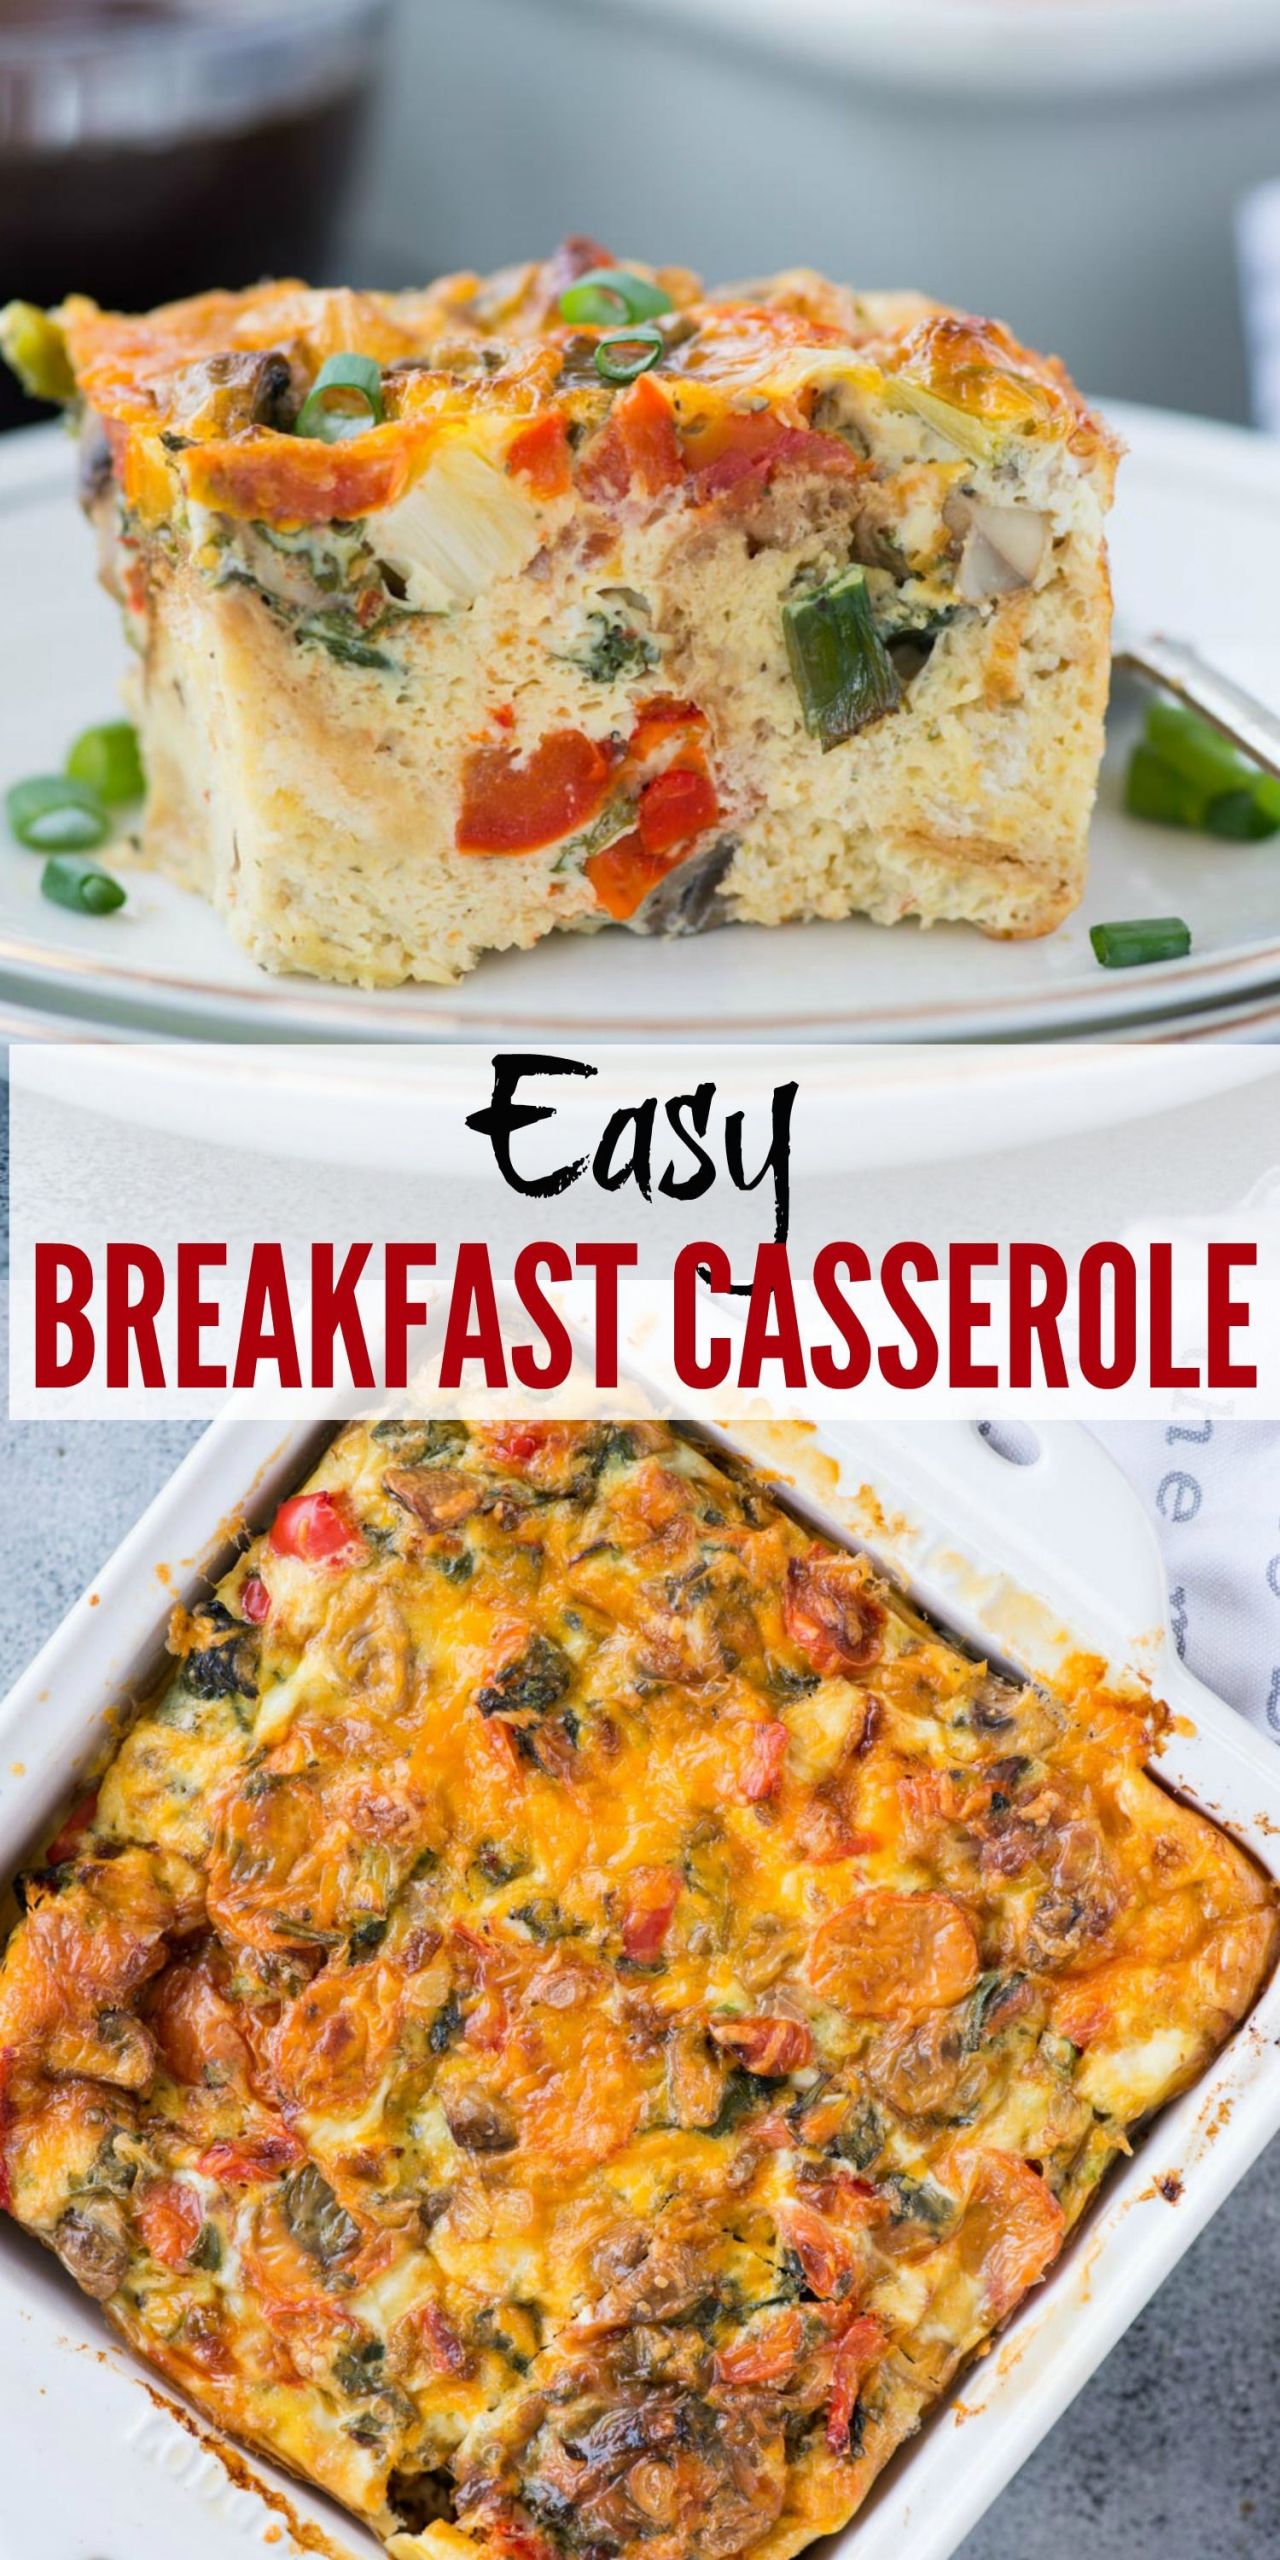 Easy Breakfast Casseroles
 EASY BREAKFAST CASSEROLE WITH BREAD The flavours of kitchen